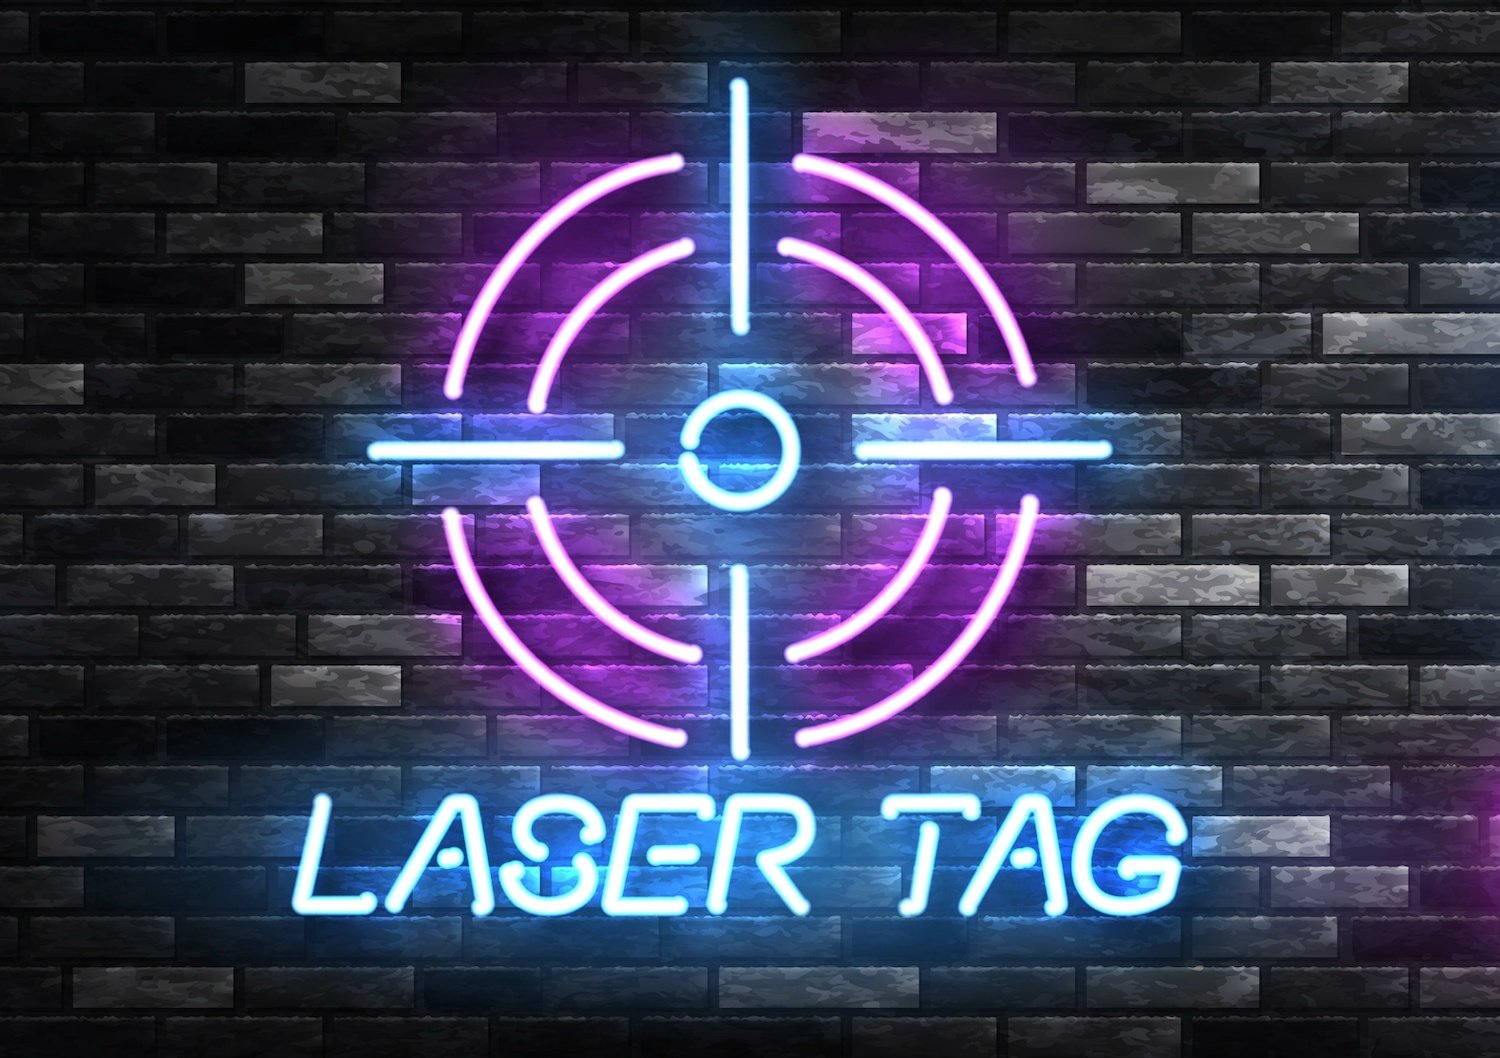 Laser Tag Fun: Interesting Facts About This Popular Pastime